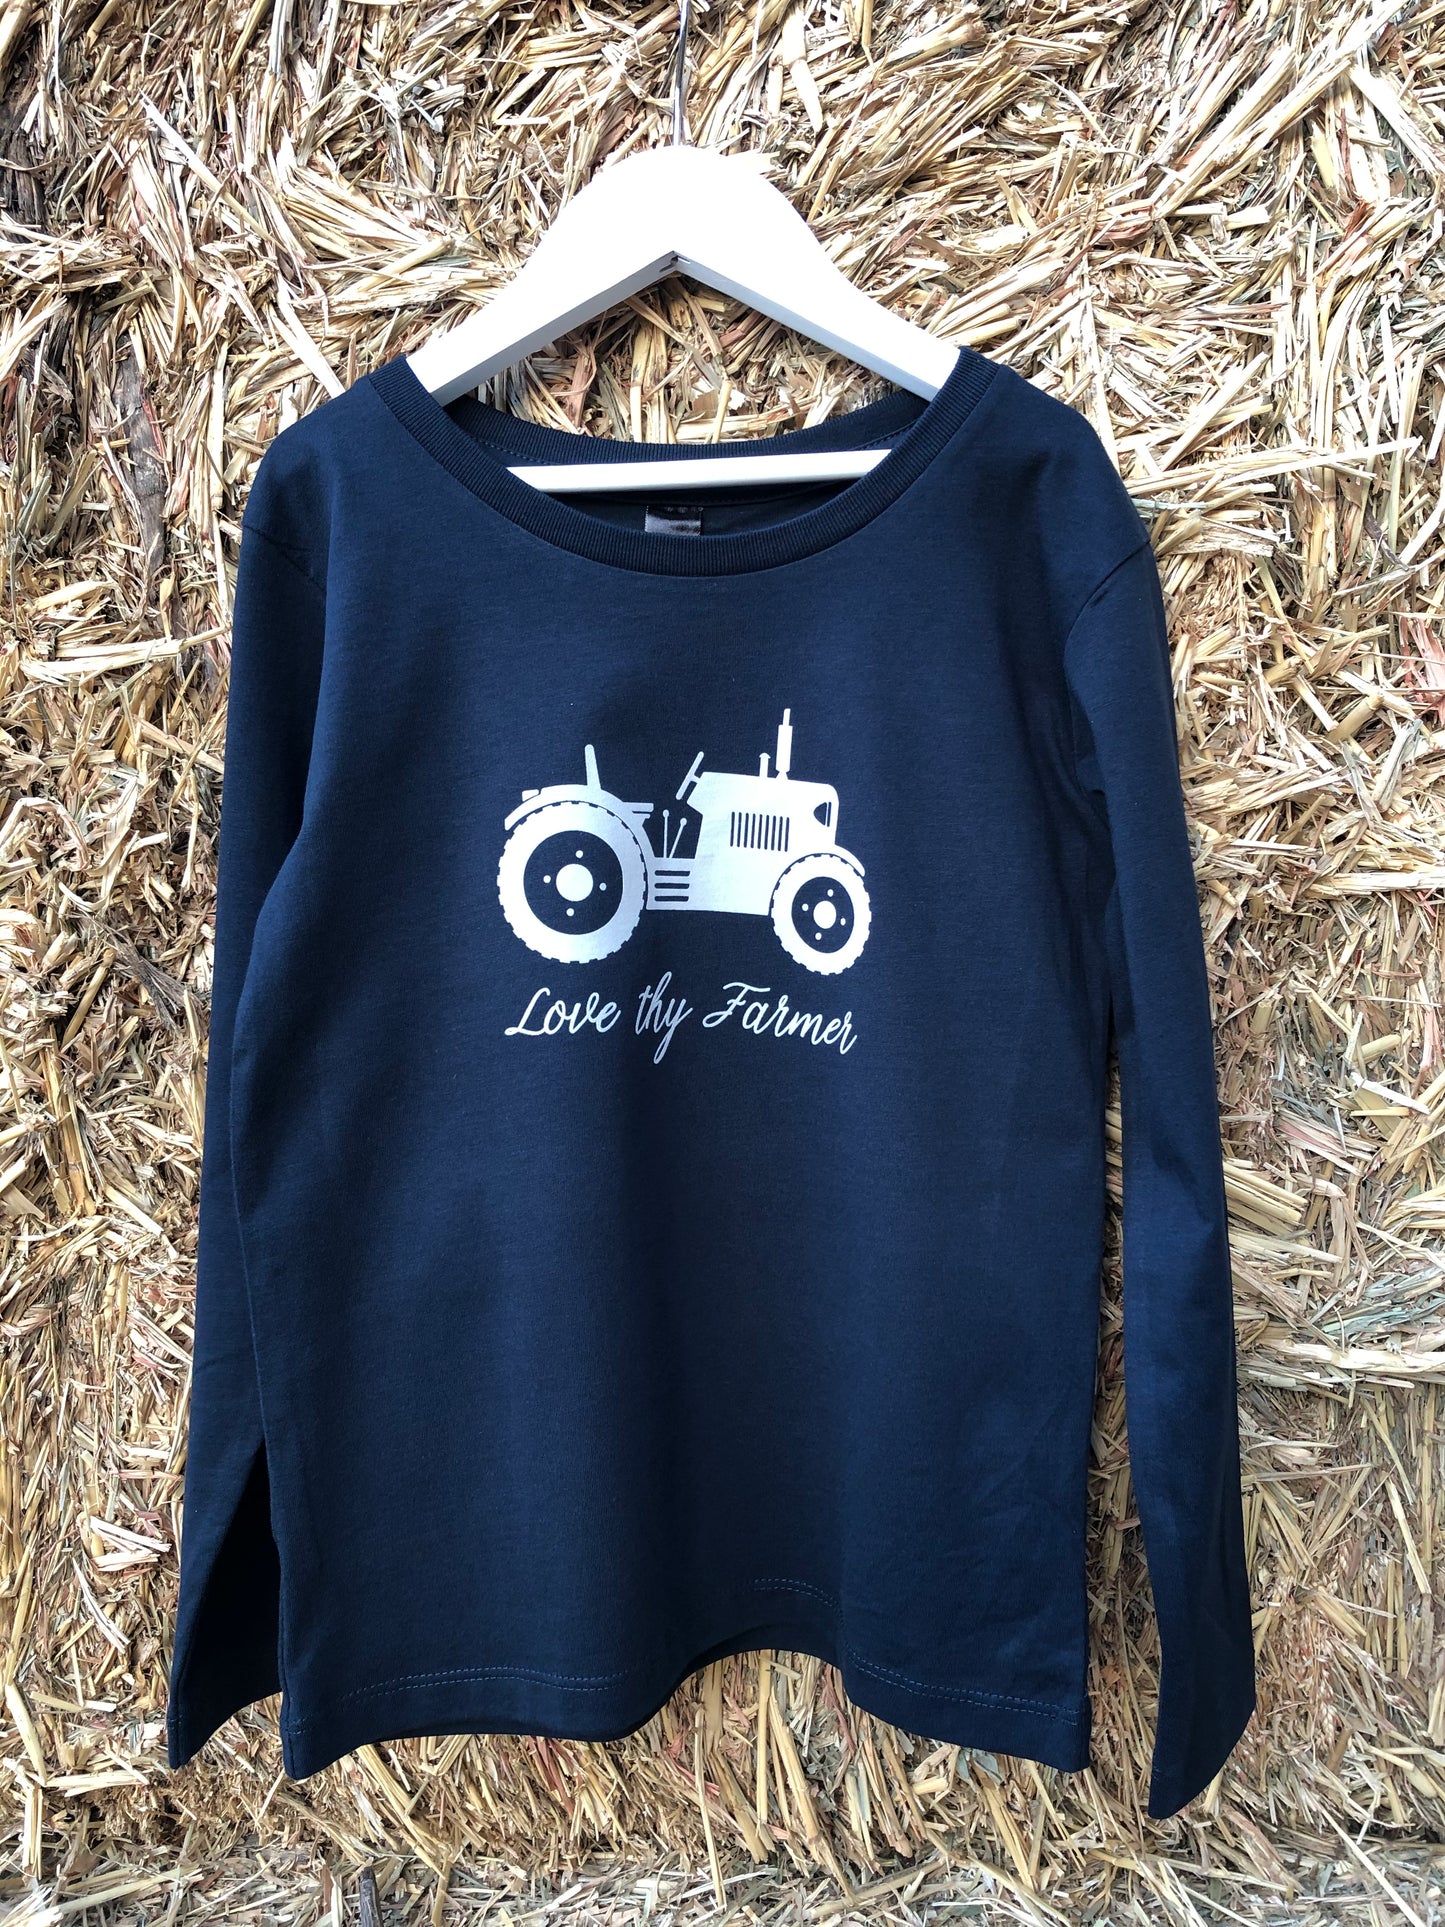 Kids' Long Sleeve Tractor T-Shirt in Khaki/Navy with Sand Printing